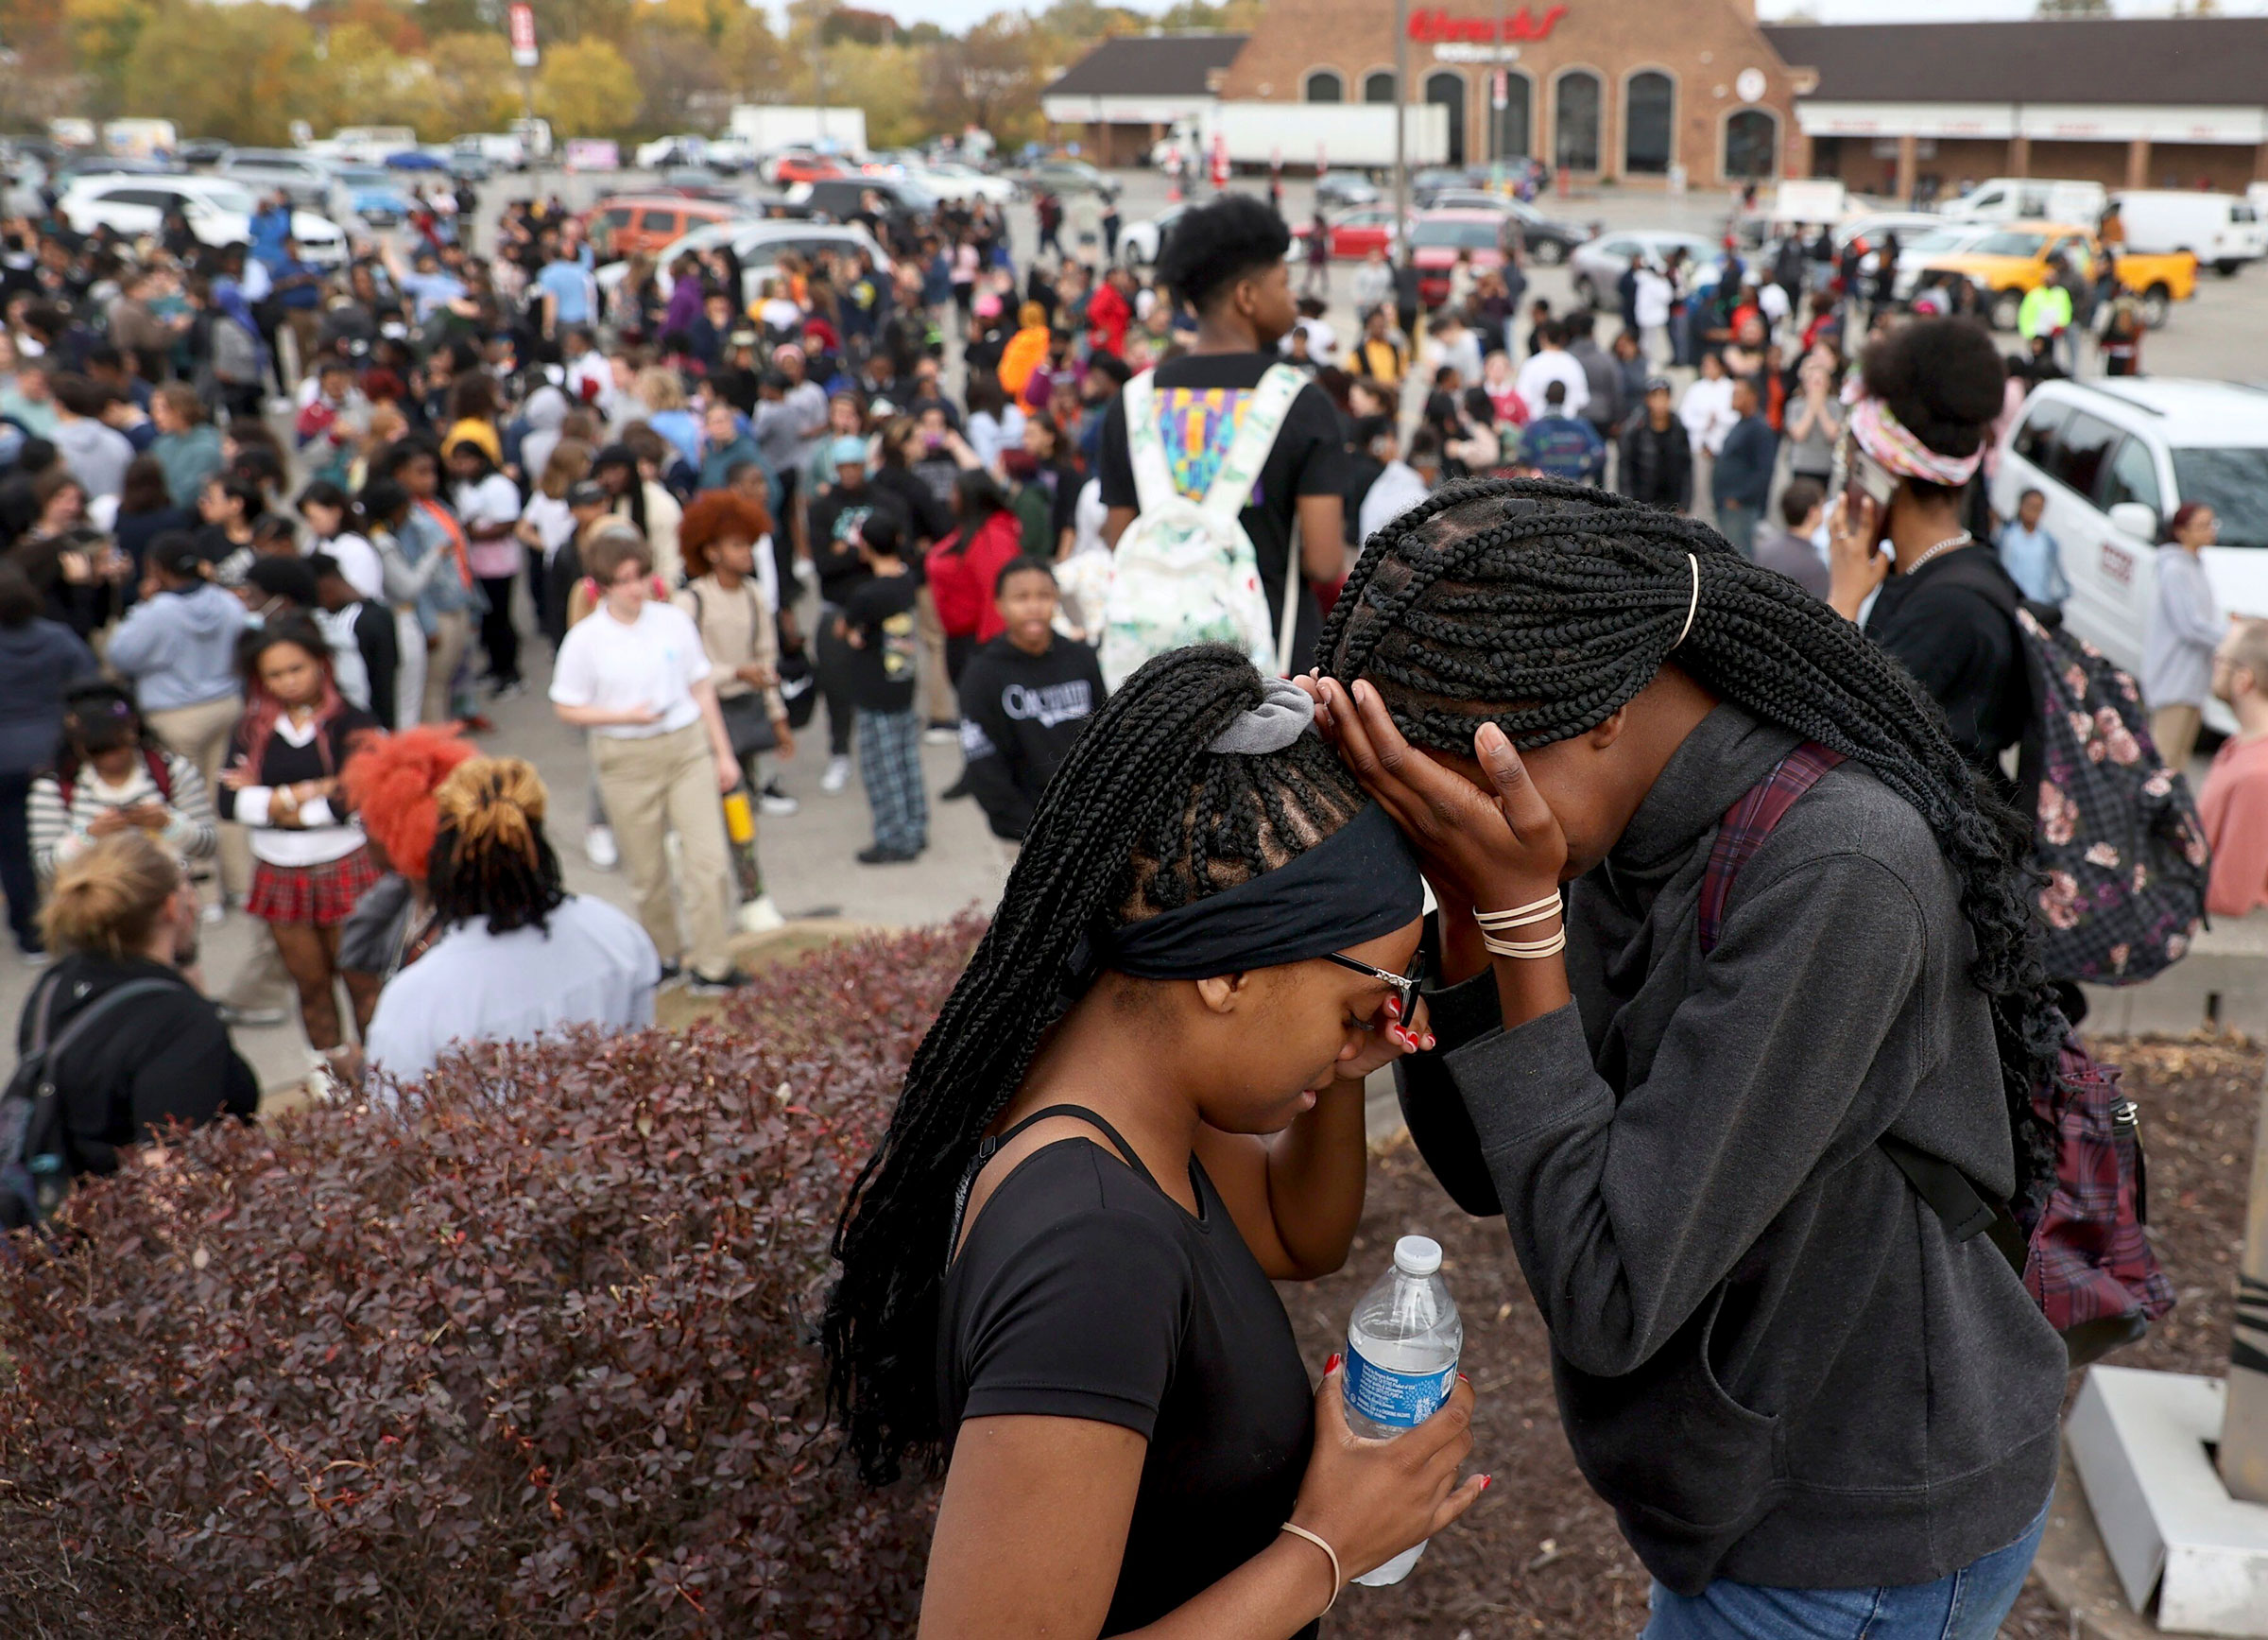 Students stand in a parking lot near the Central Visual &amp; Performing Arts High School after a reported shooting at the school in St. Louis, on Monday, Oct. 24, 2022. (David Carson—St. Louis Post-Dispatch/AP)